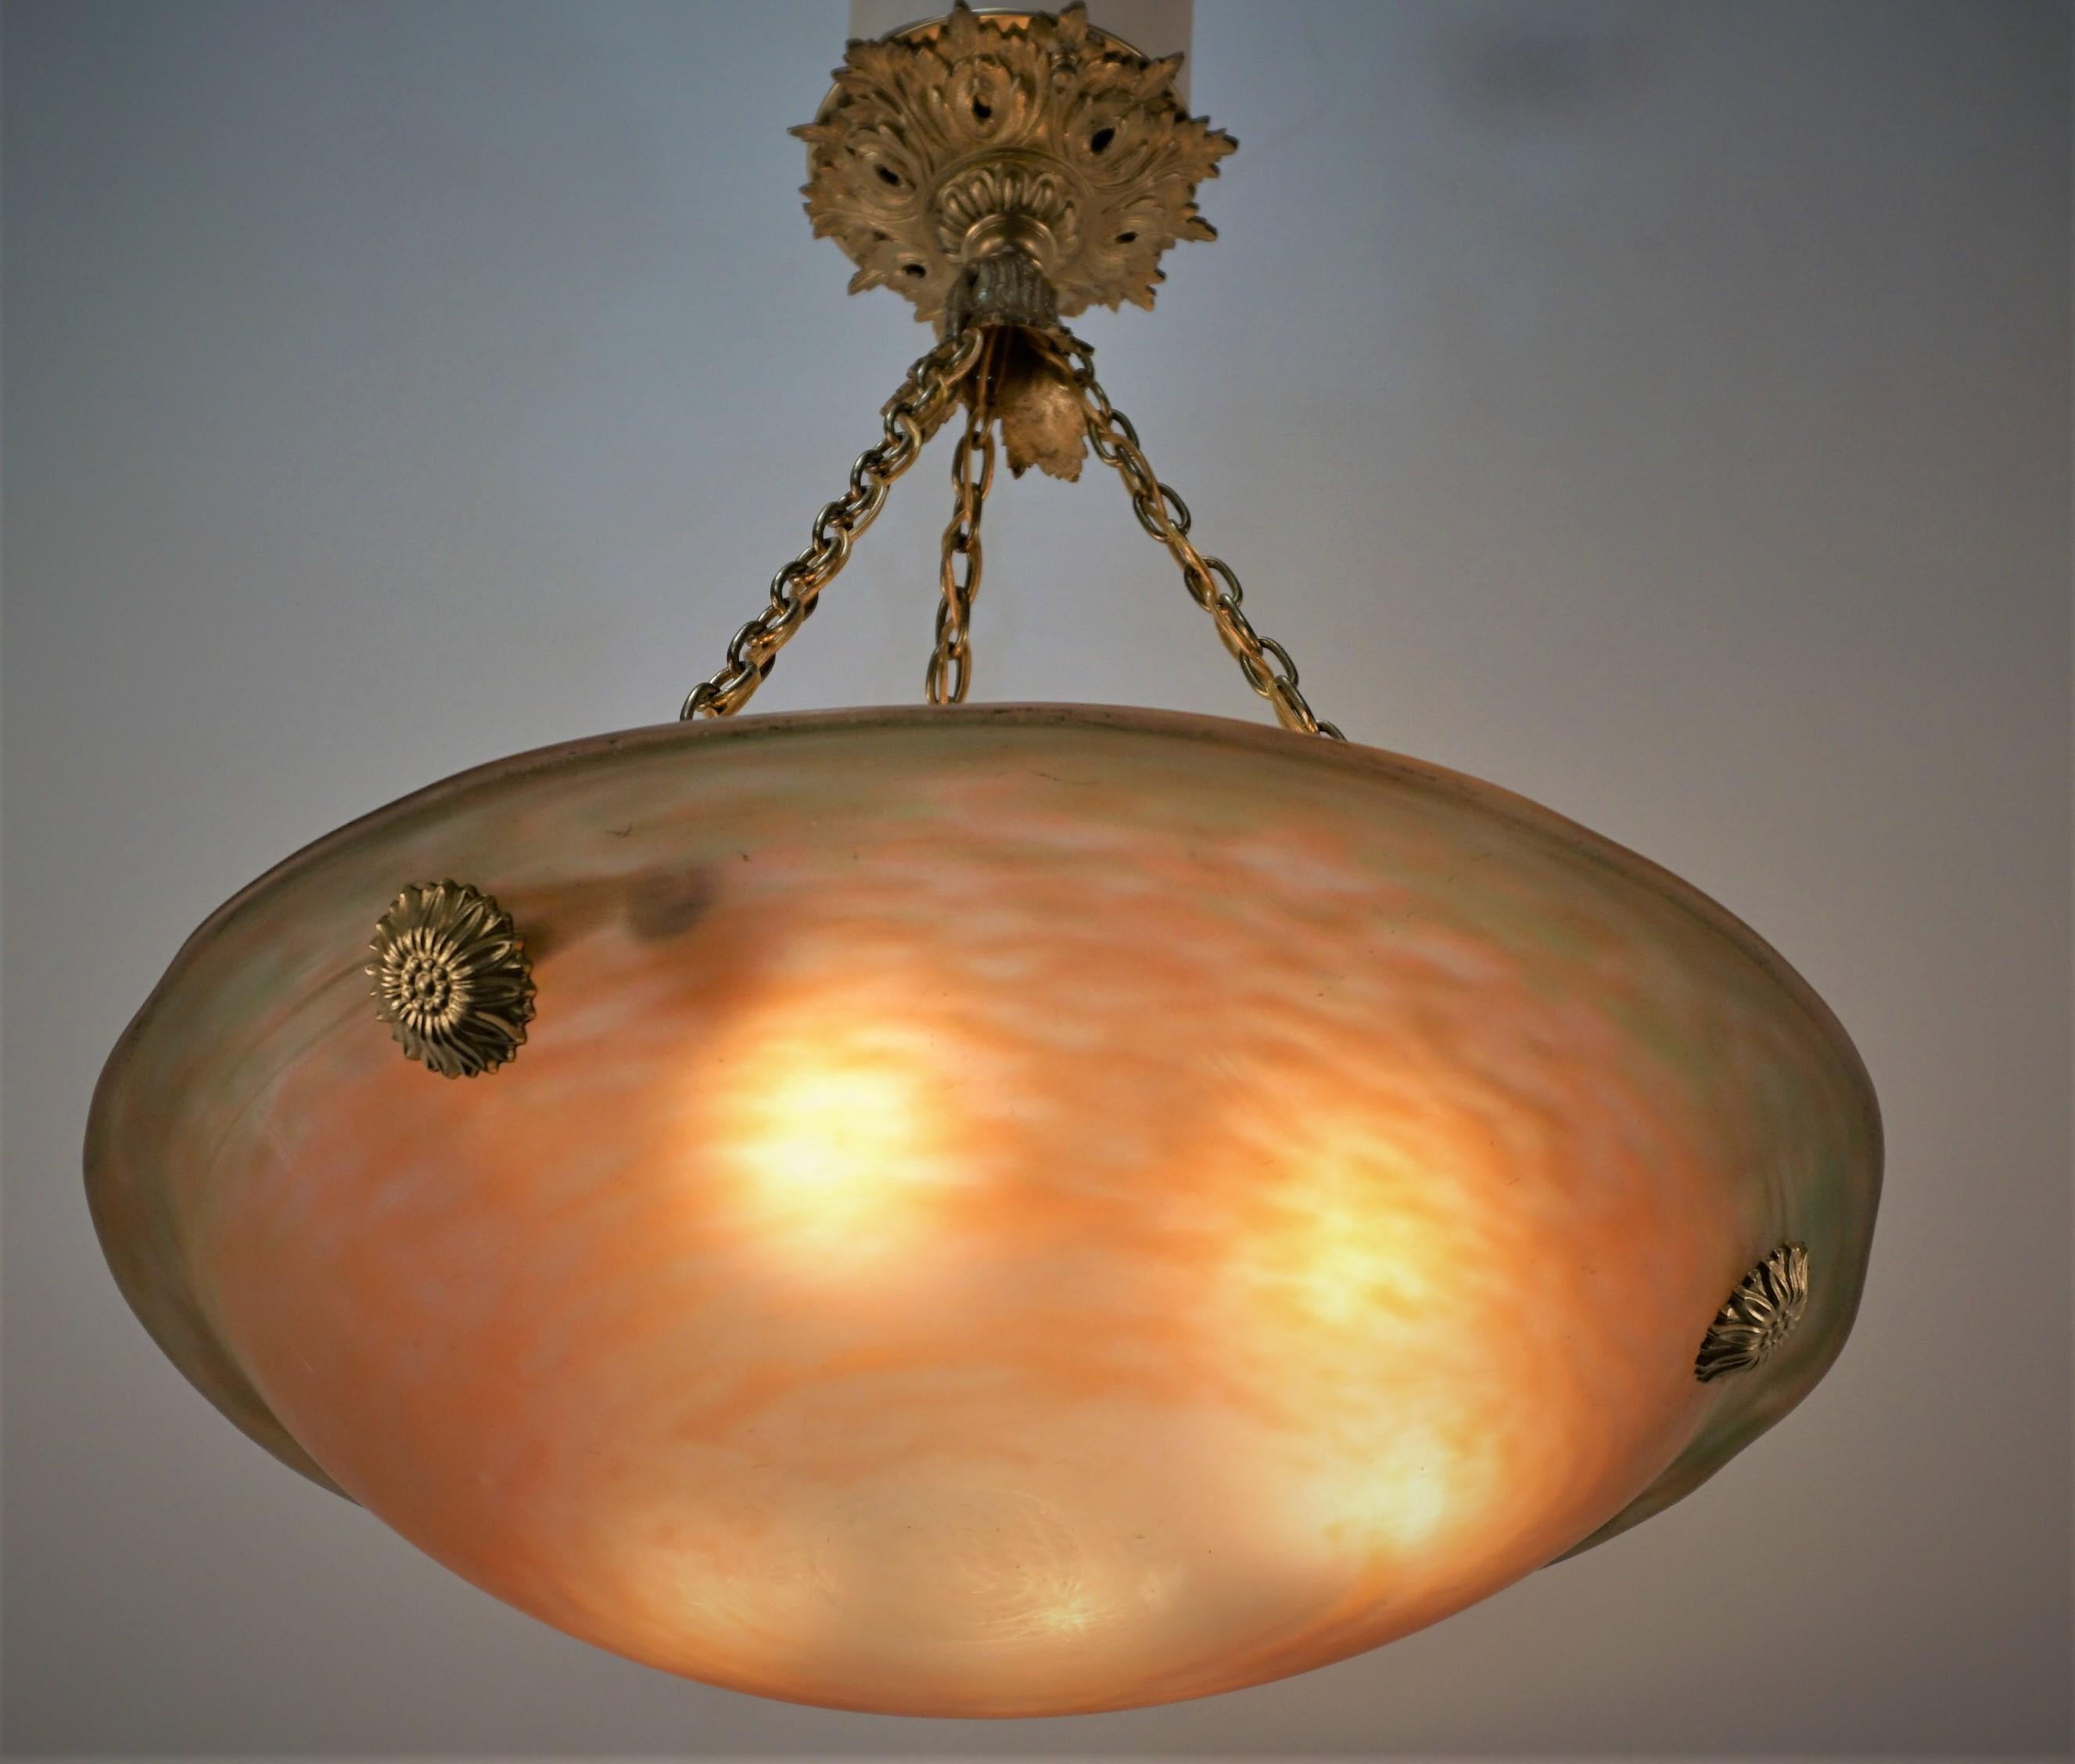 Beautiful multi color blown glass chandelier with bronze hardware.
Professionally electrified with six light sockets.